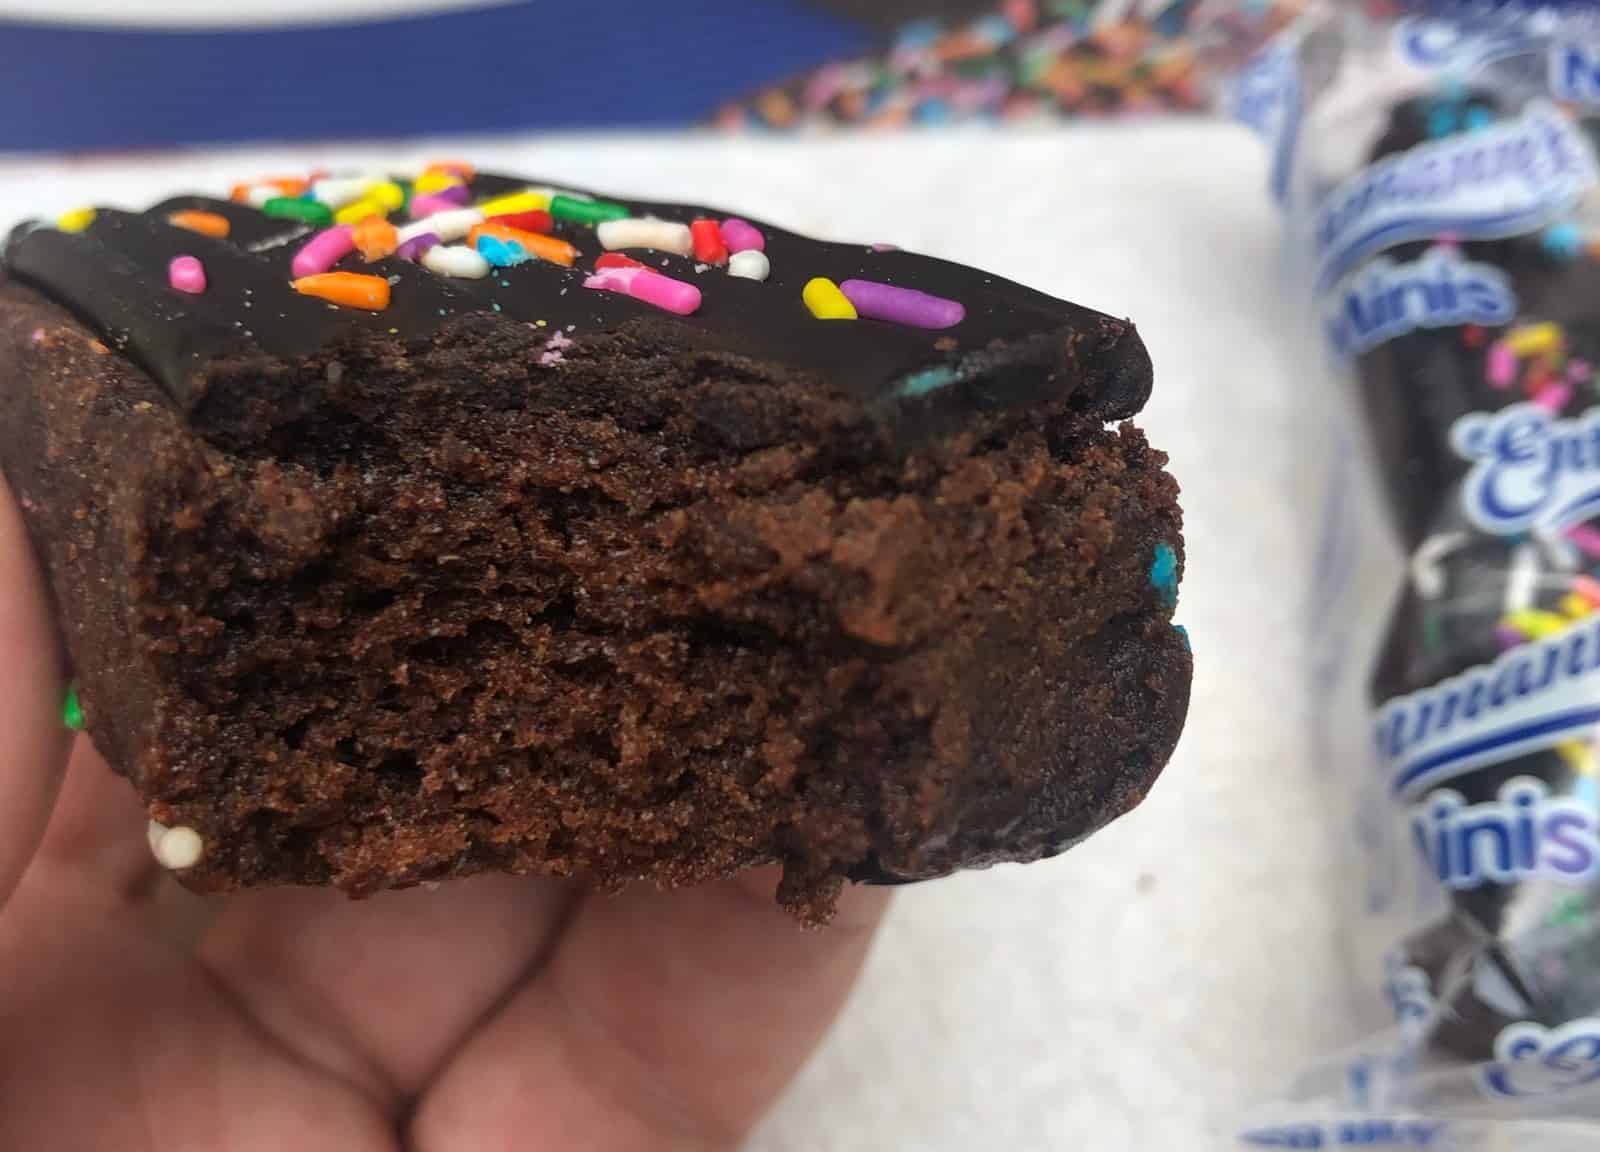 Celebrate the #SprinklefestGiveaway with #Entenmanns for the chance to win NEW Entenmann’s Minis Sprinkled Iced Brownies and more! Plus, enter for a chance to win a $25 Visa Gift Card right here!